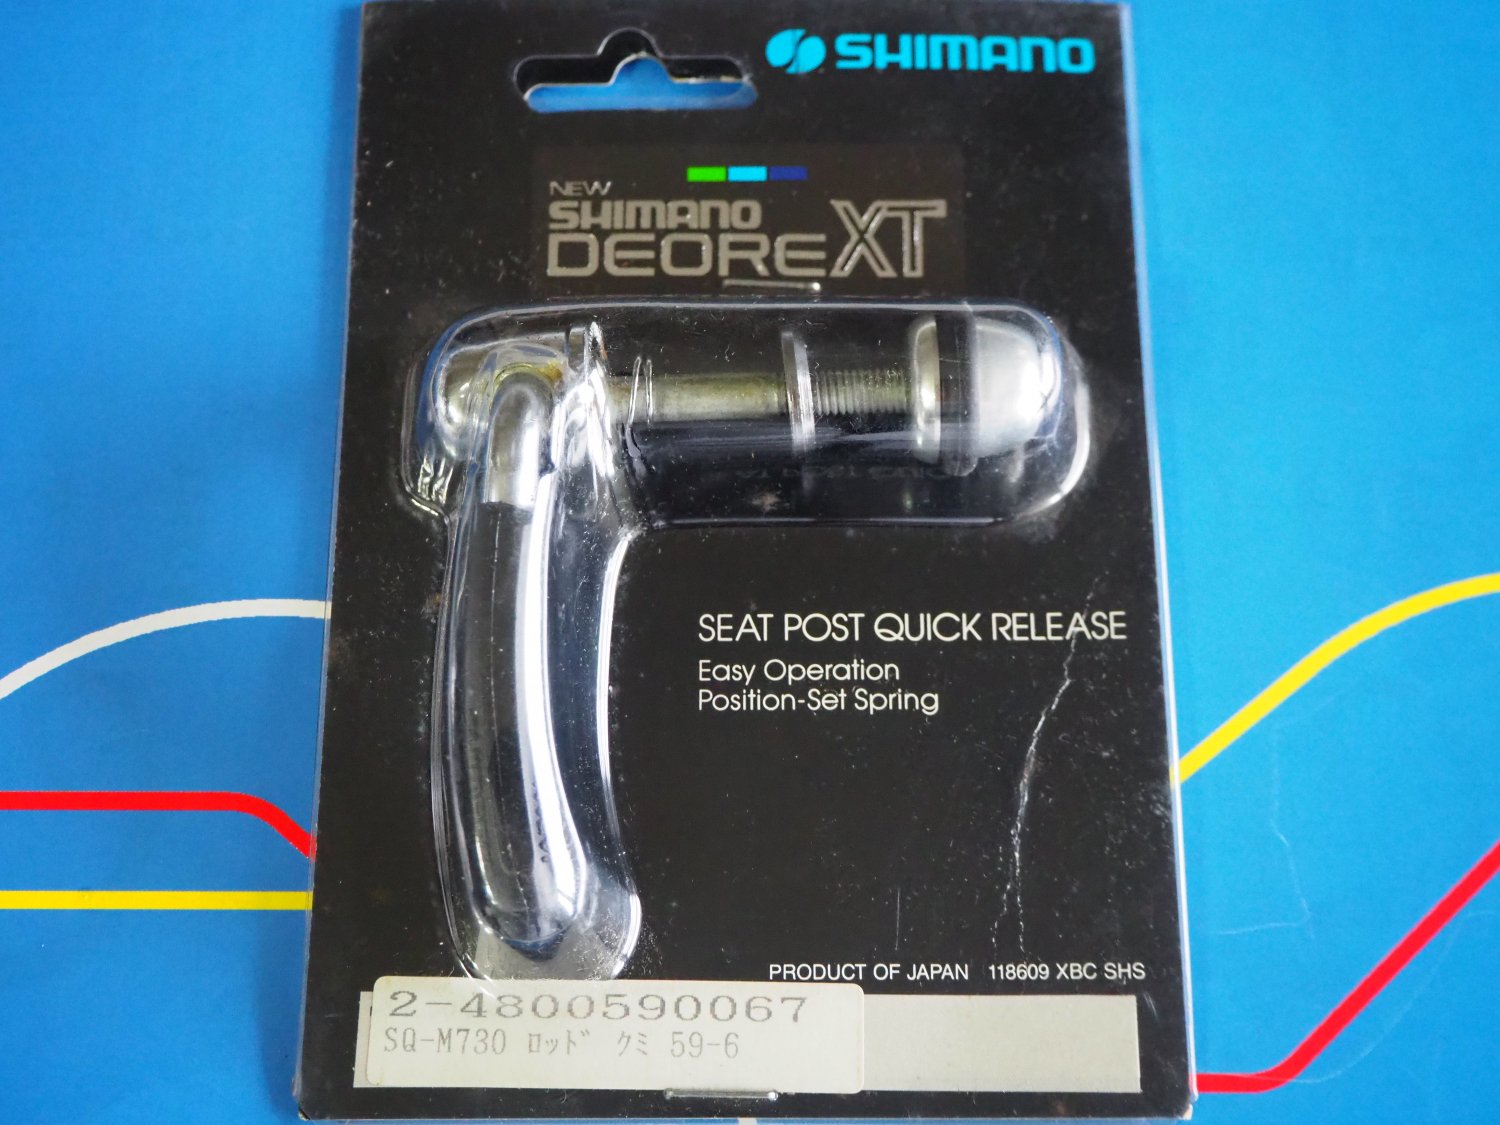 SHIMANO DEORE XT SEAT POST QUICK RELEASE